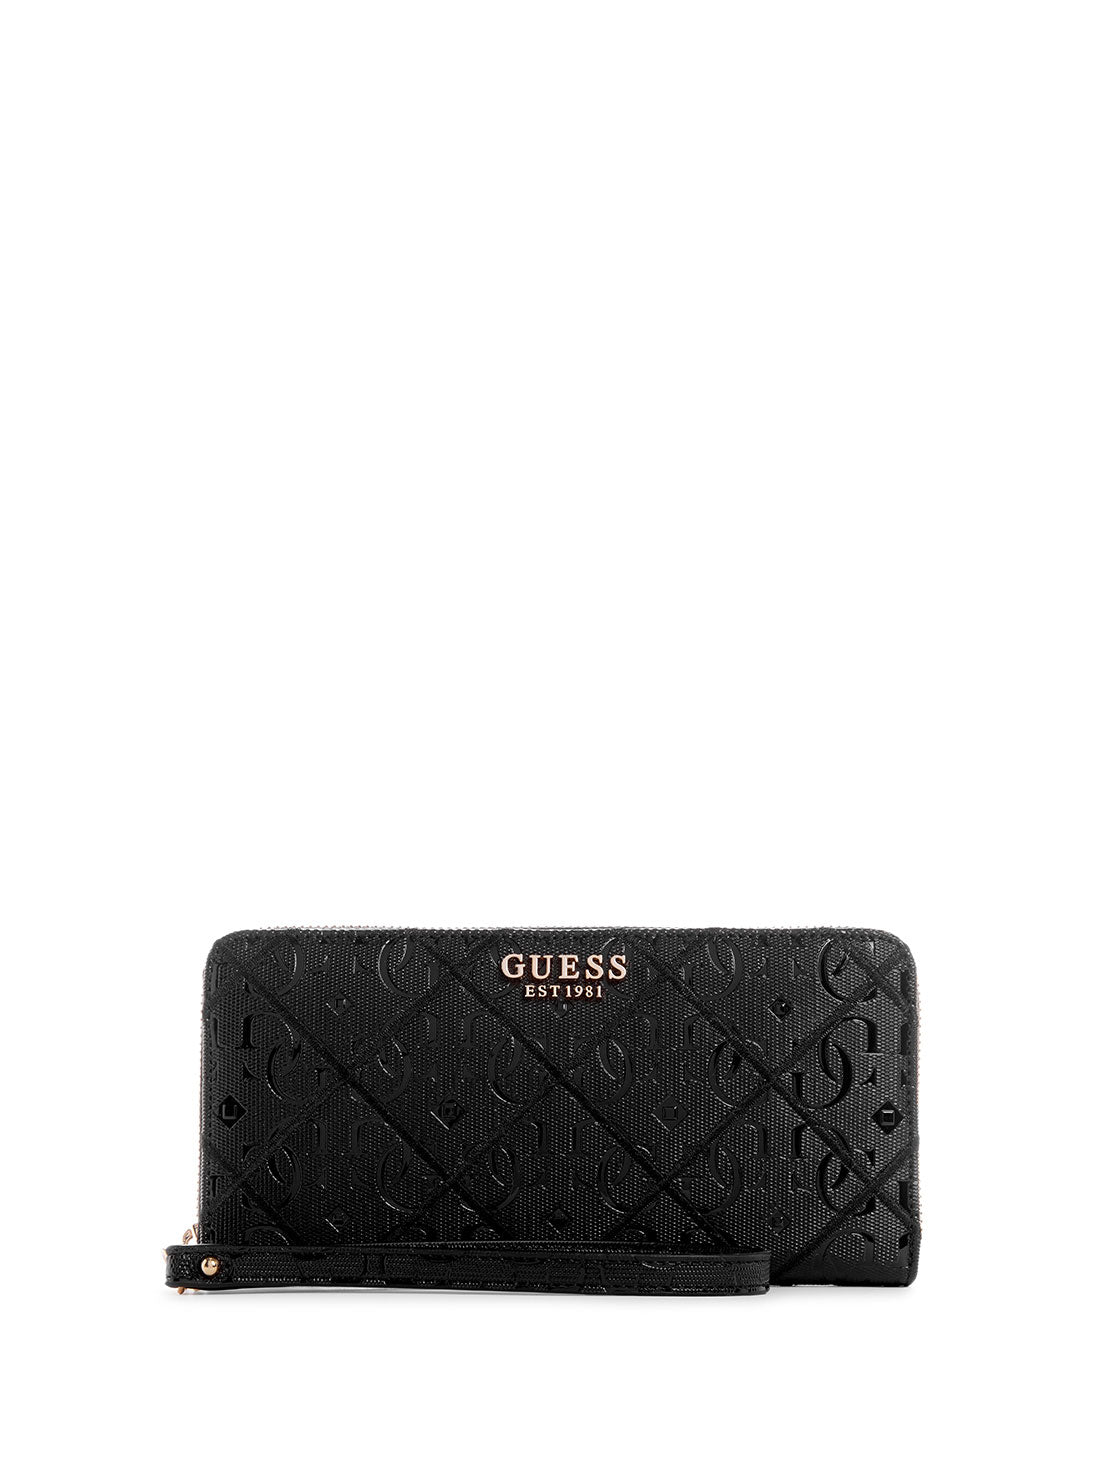 GUESS Women's Black Caddie Large Wallet GG878346 Front View